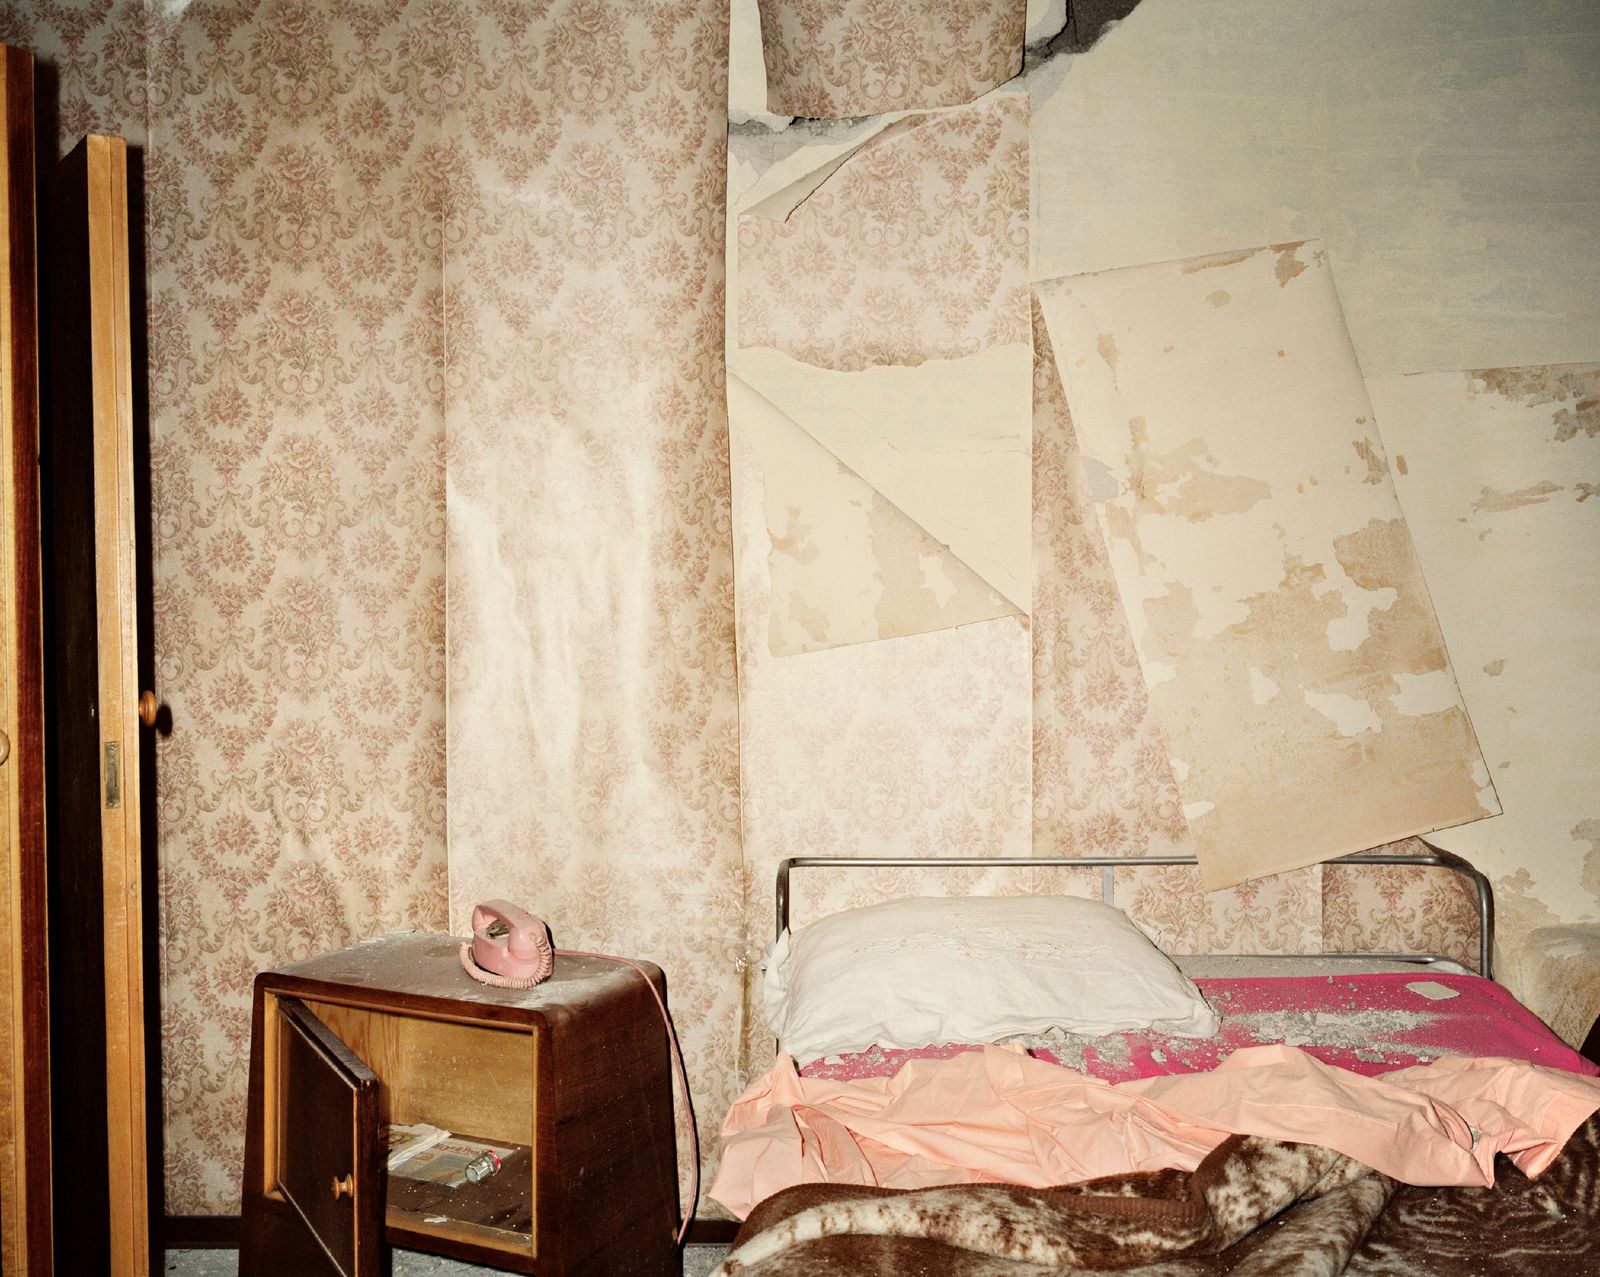 © Giovanni Cocco - Image from the DISPLACEMENT - NEW TOWN NO TOWN photography project